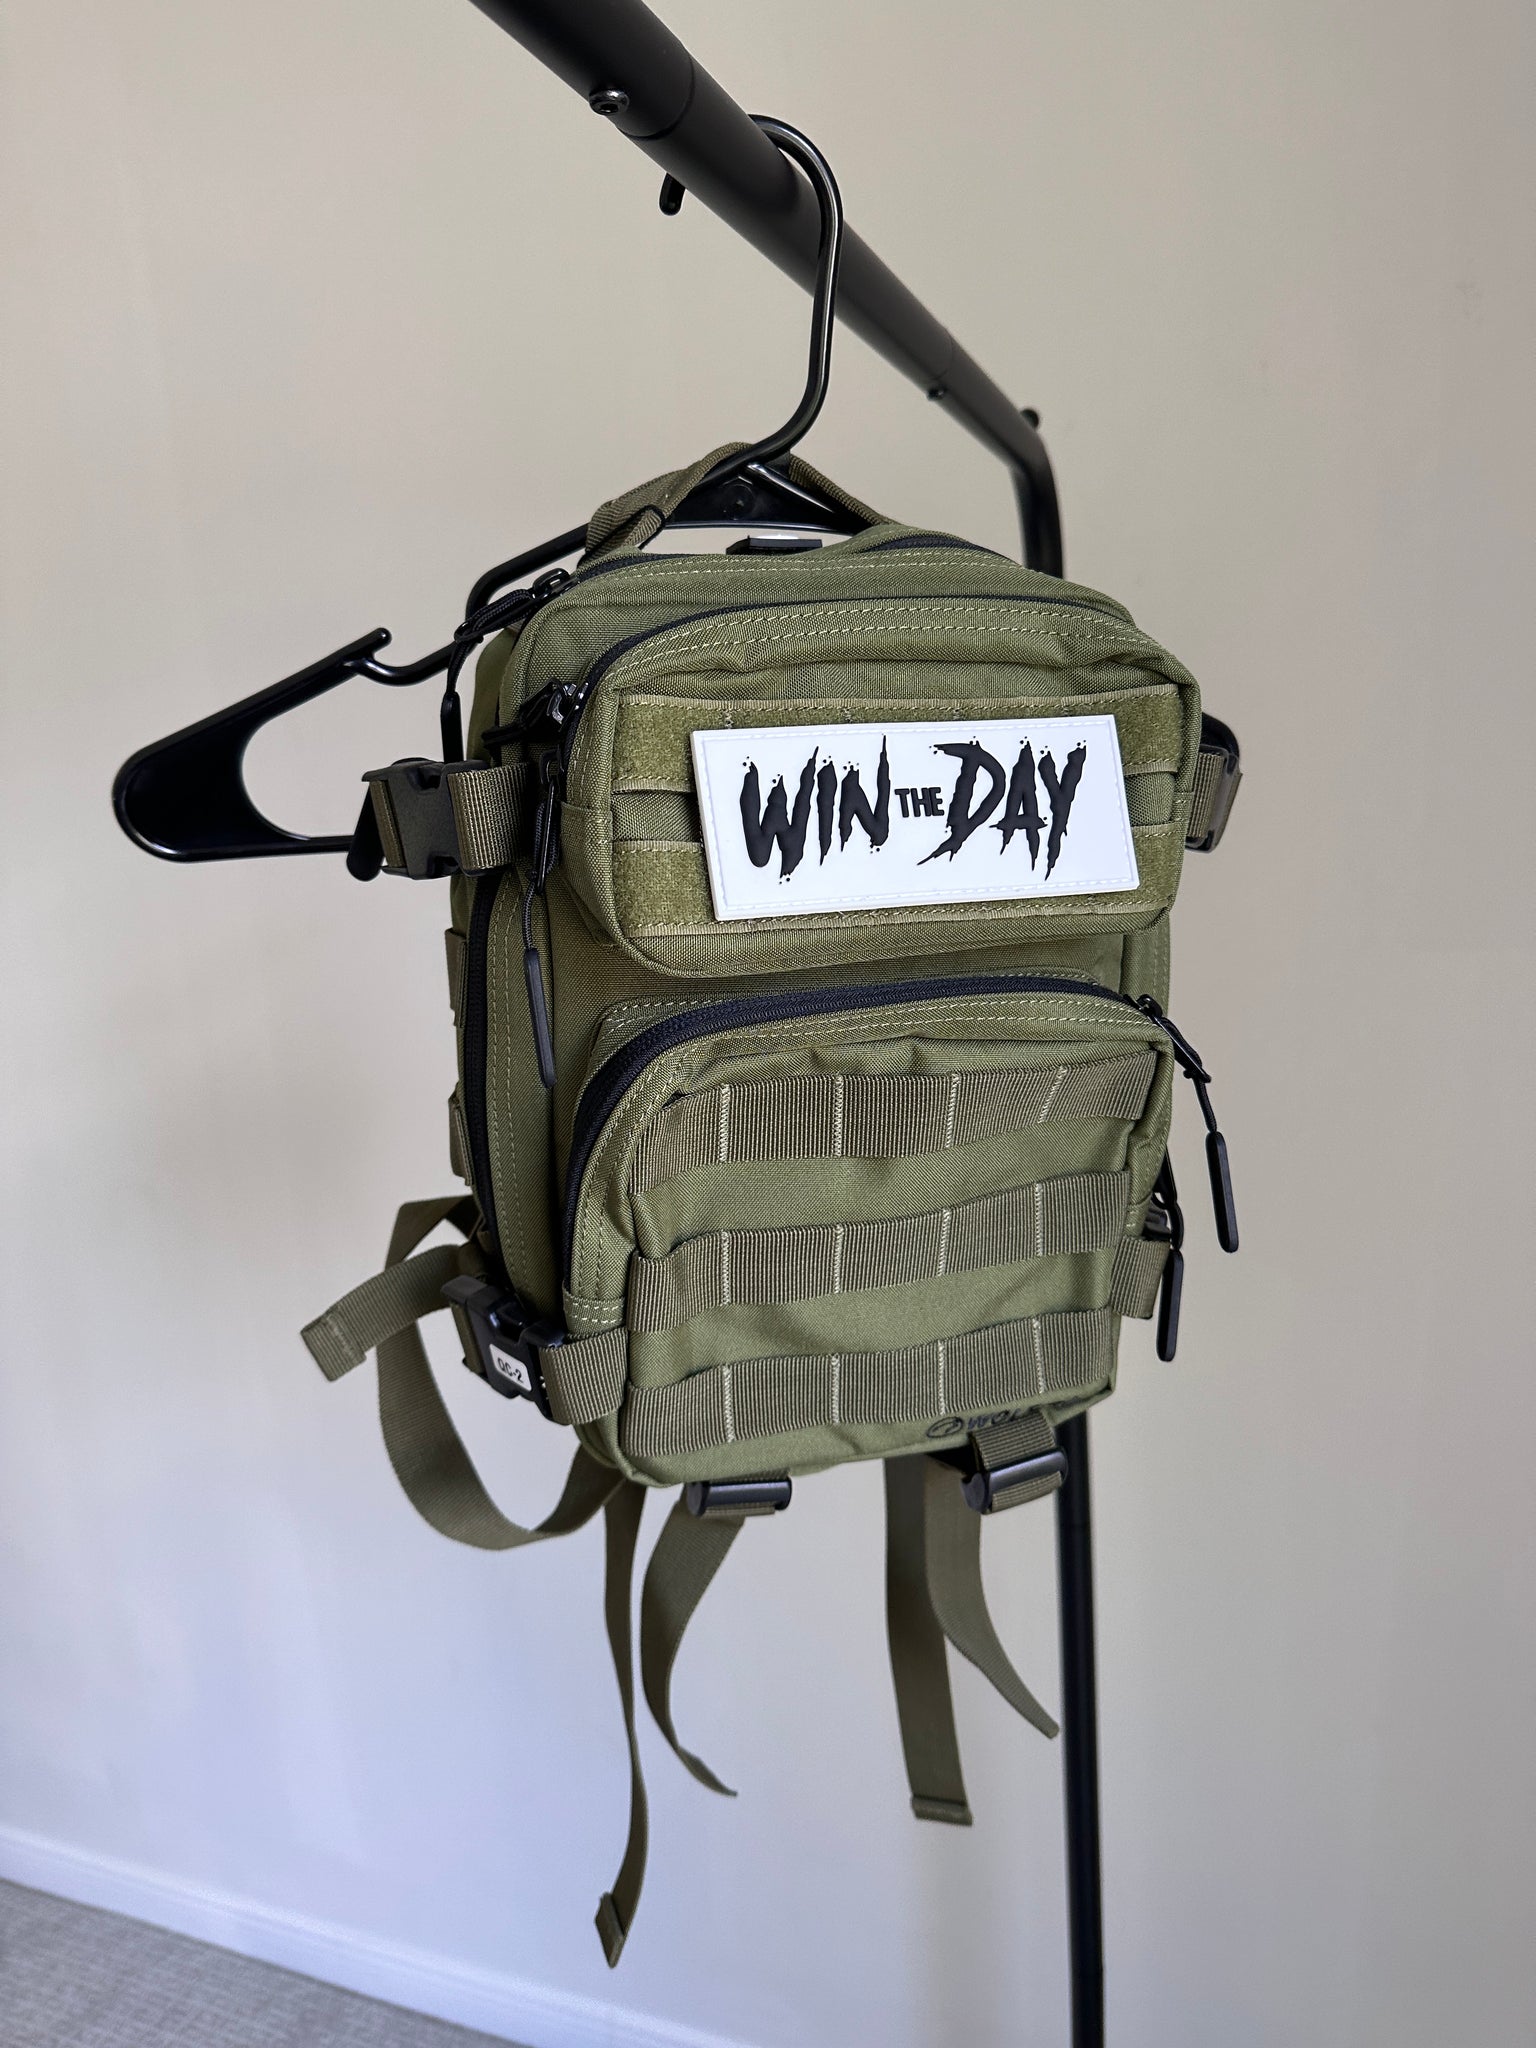 Win the Day Patch Black & White